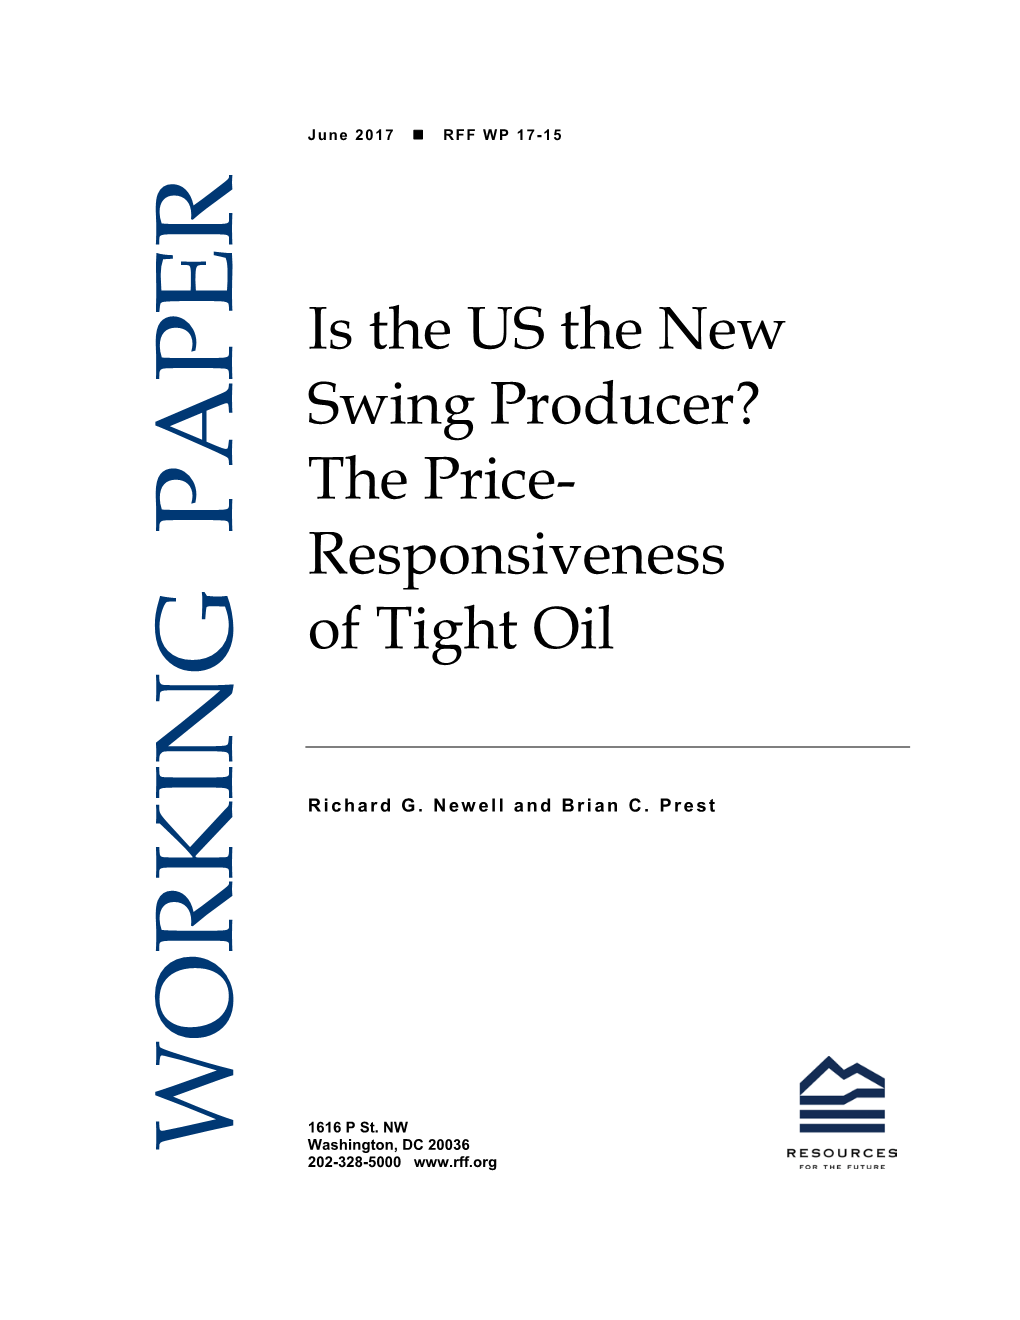 Is the US the New Swing Producer? the Price-Responsiveness of Tight Oil